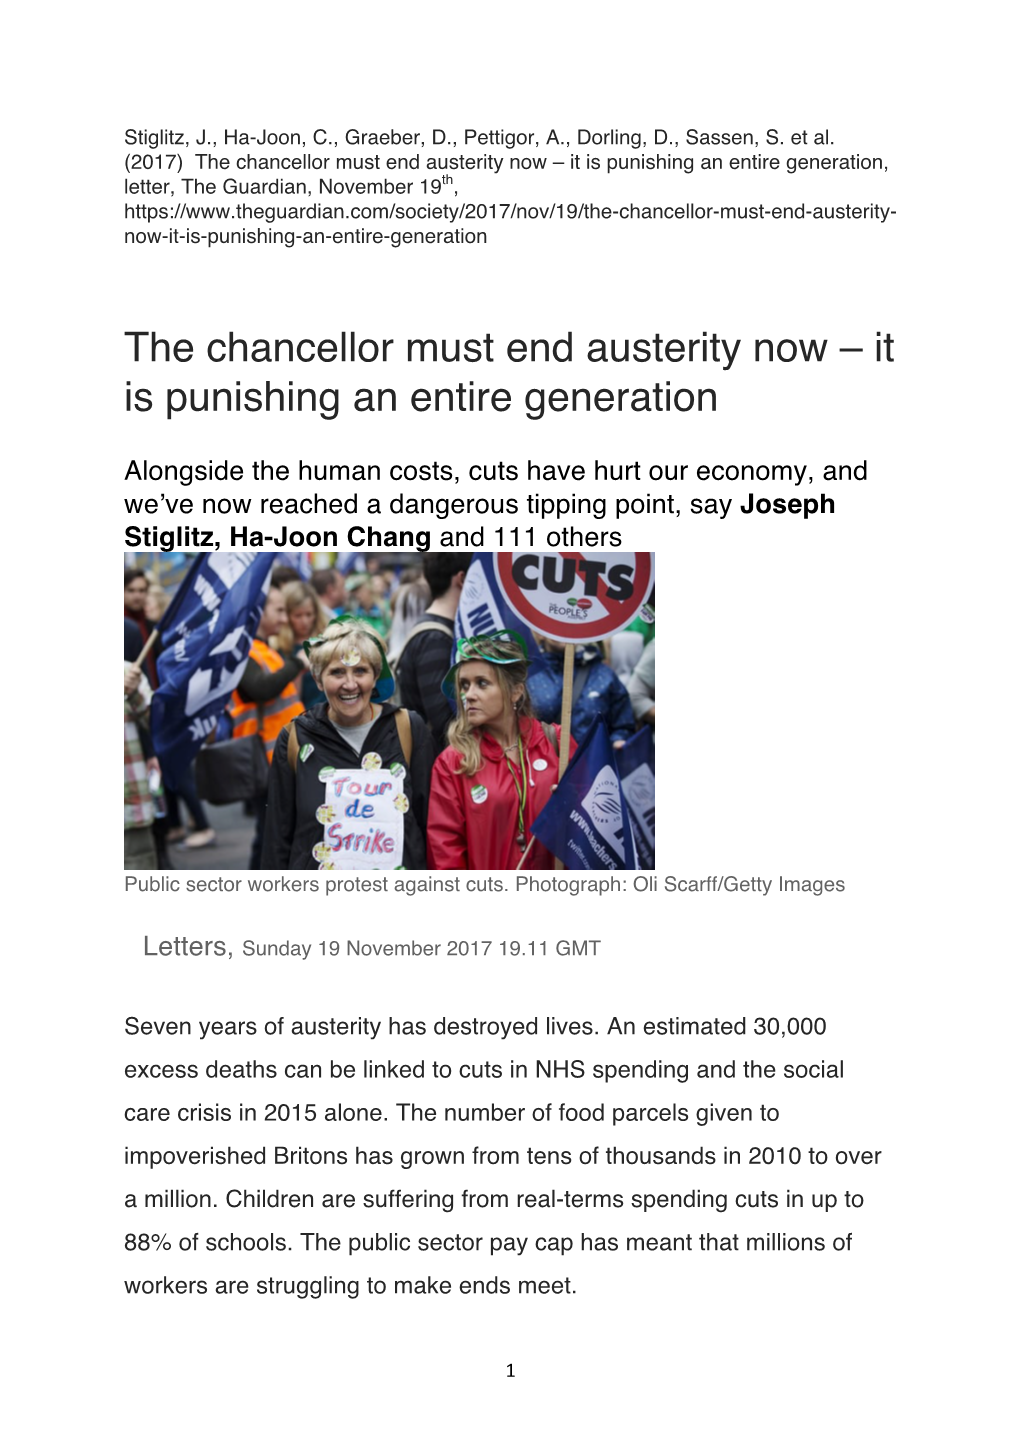 The Chancellor Must End Austerity Now – It Is Punishing an Entire Generation